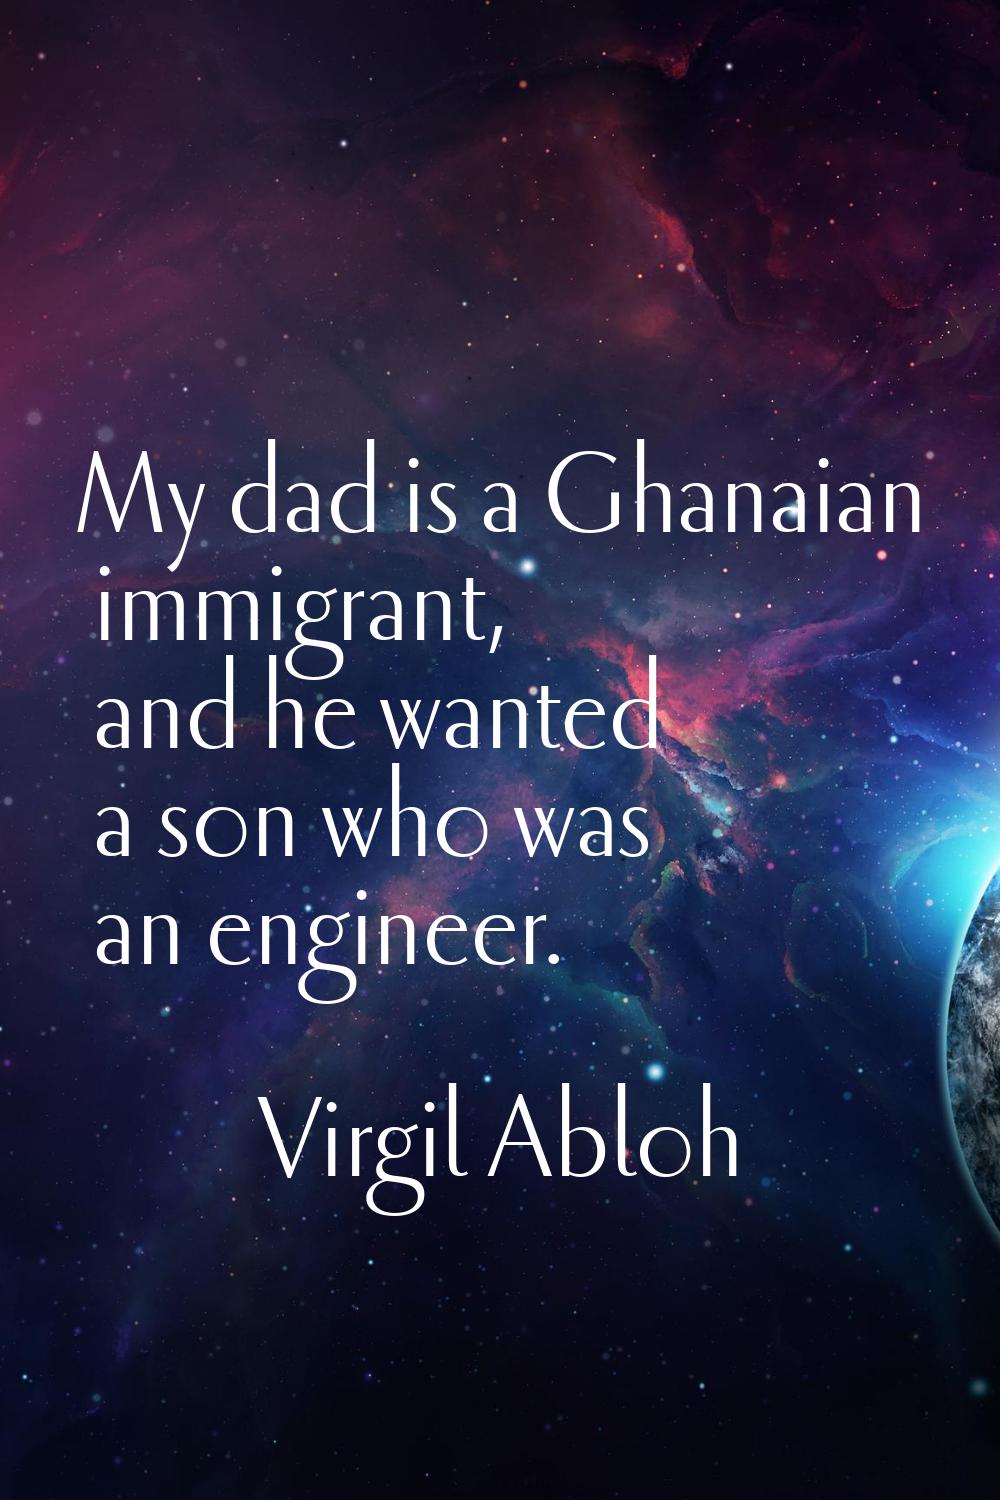 My dad is a Ghanaian immigrant, and he wanted a son who was an engineer.